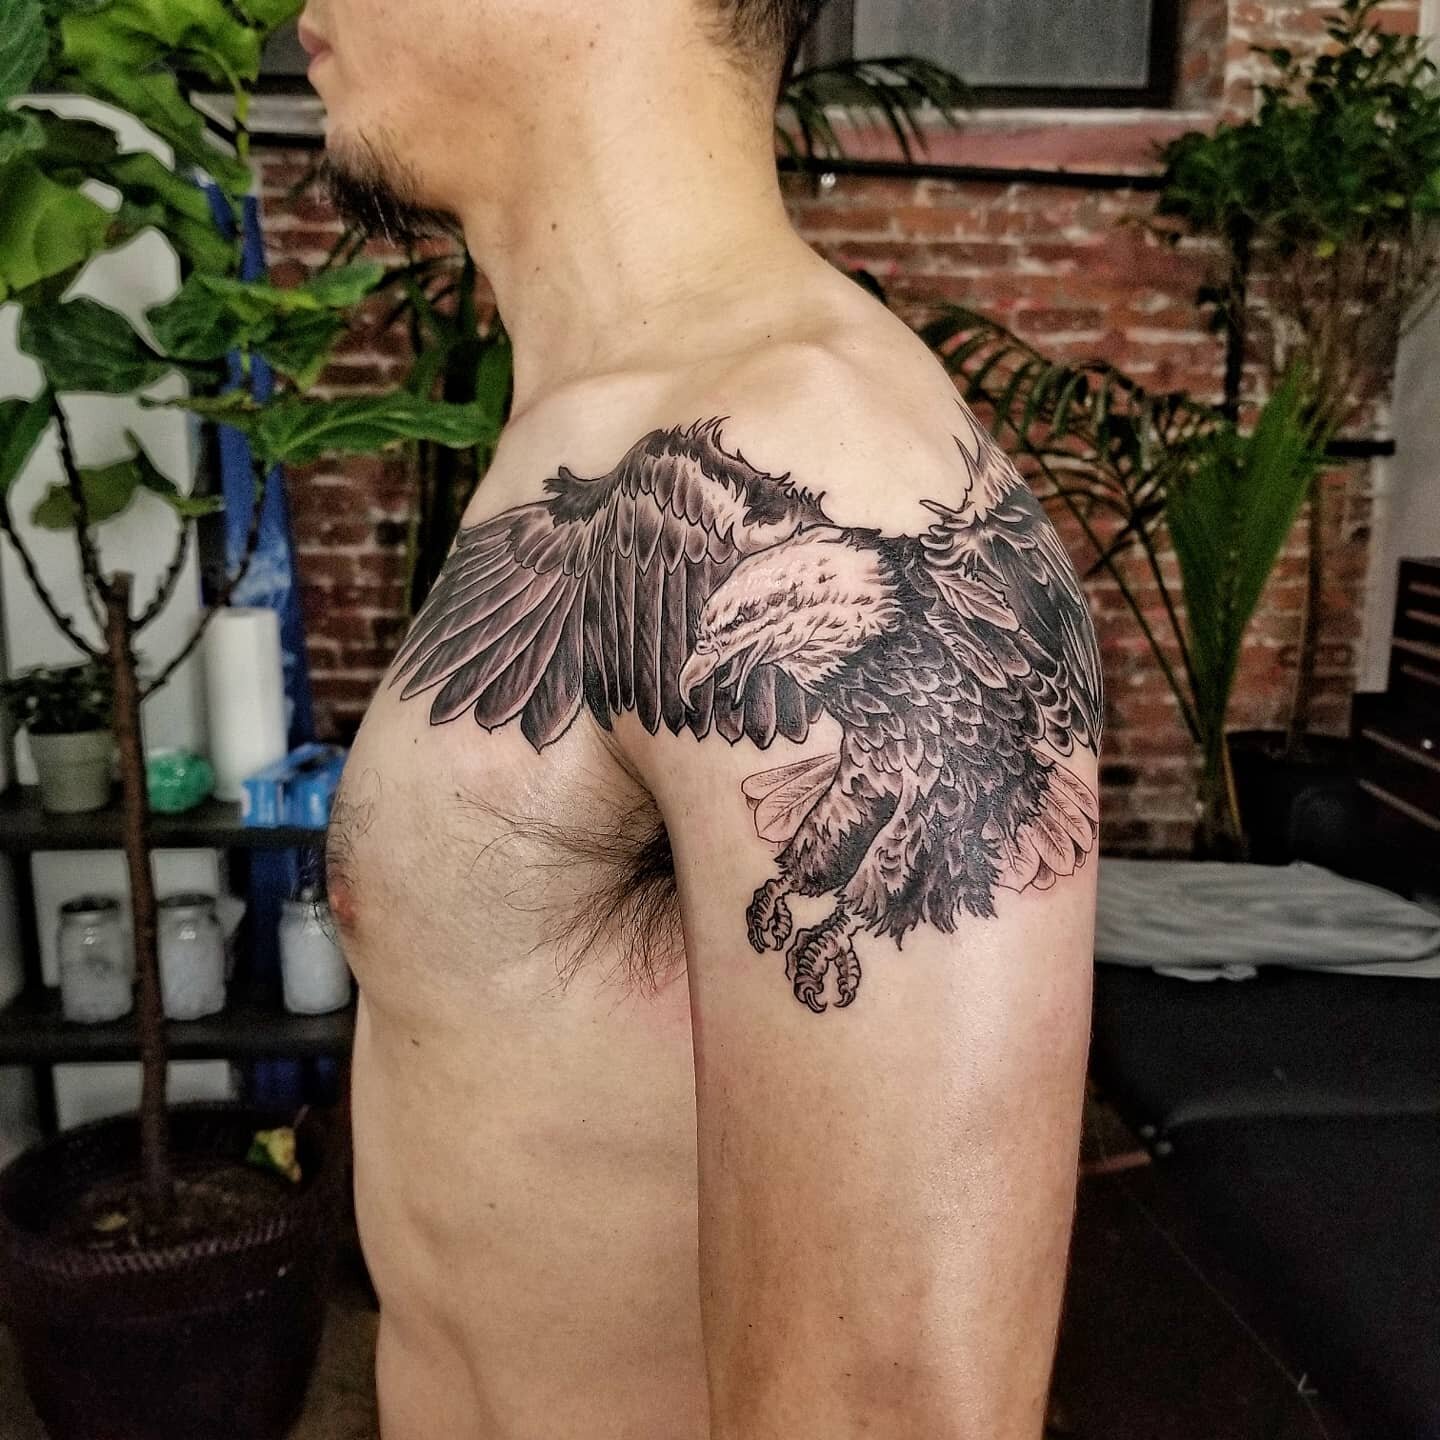 Bald eagle for P who flew in all the way from Shanghai to get this tattoo done. 
Much respect and admiration for the dedication of my clients who inspire me with their ideas and commitments. 
Very happy with how this turned out.
Sat like a total cham